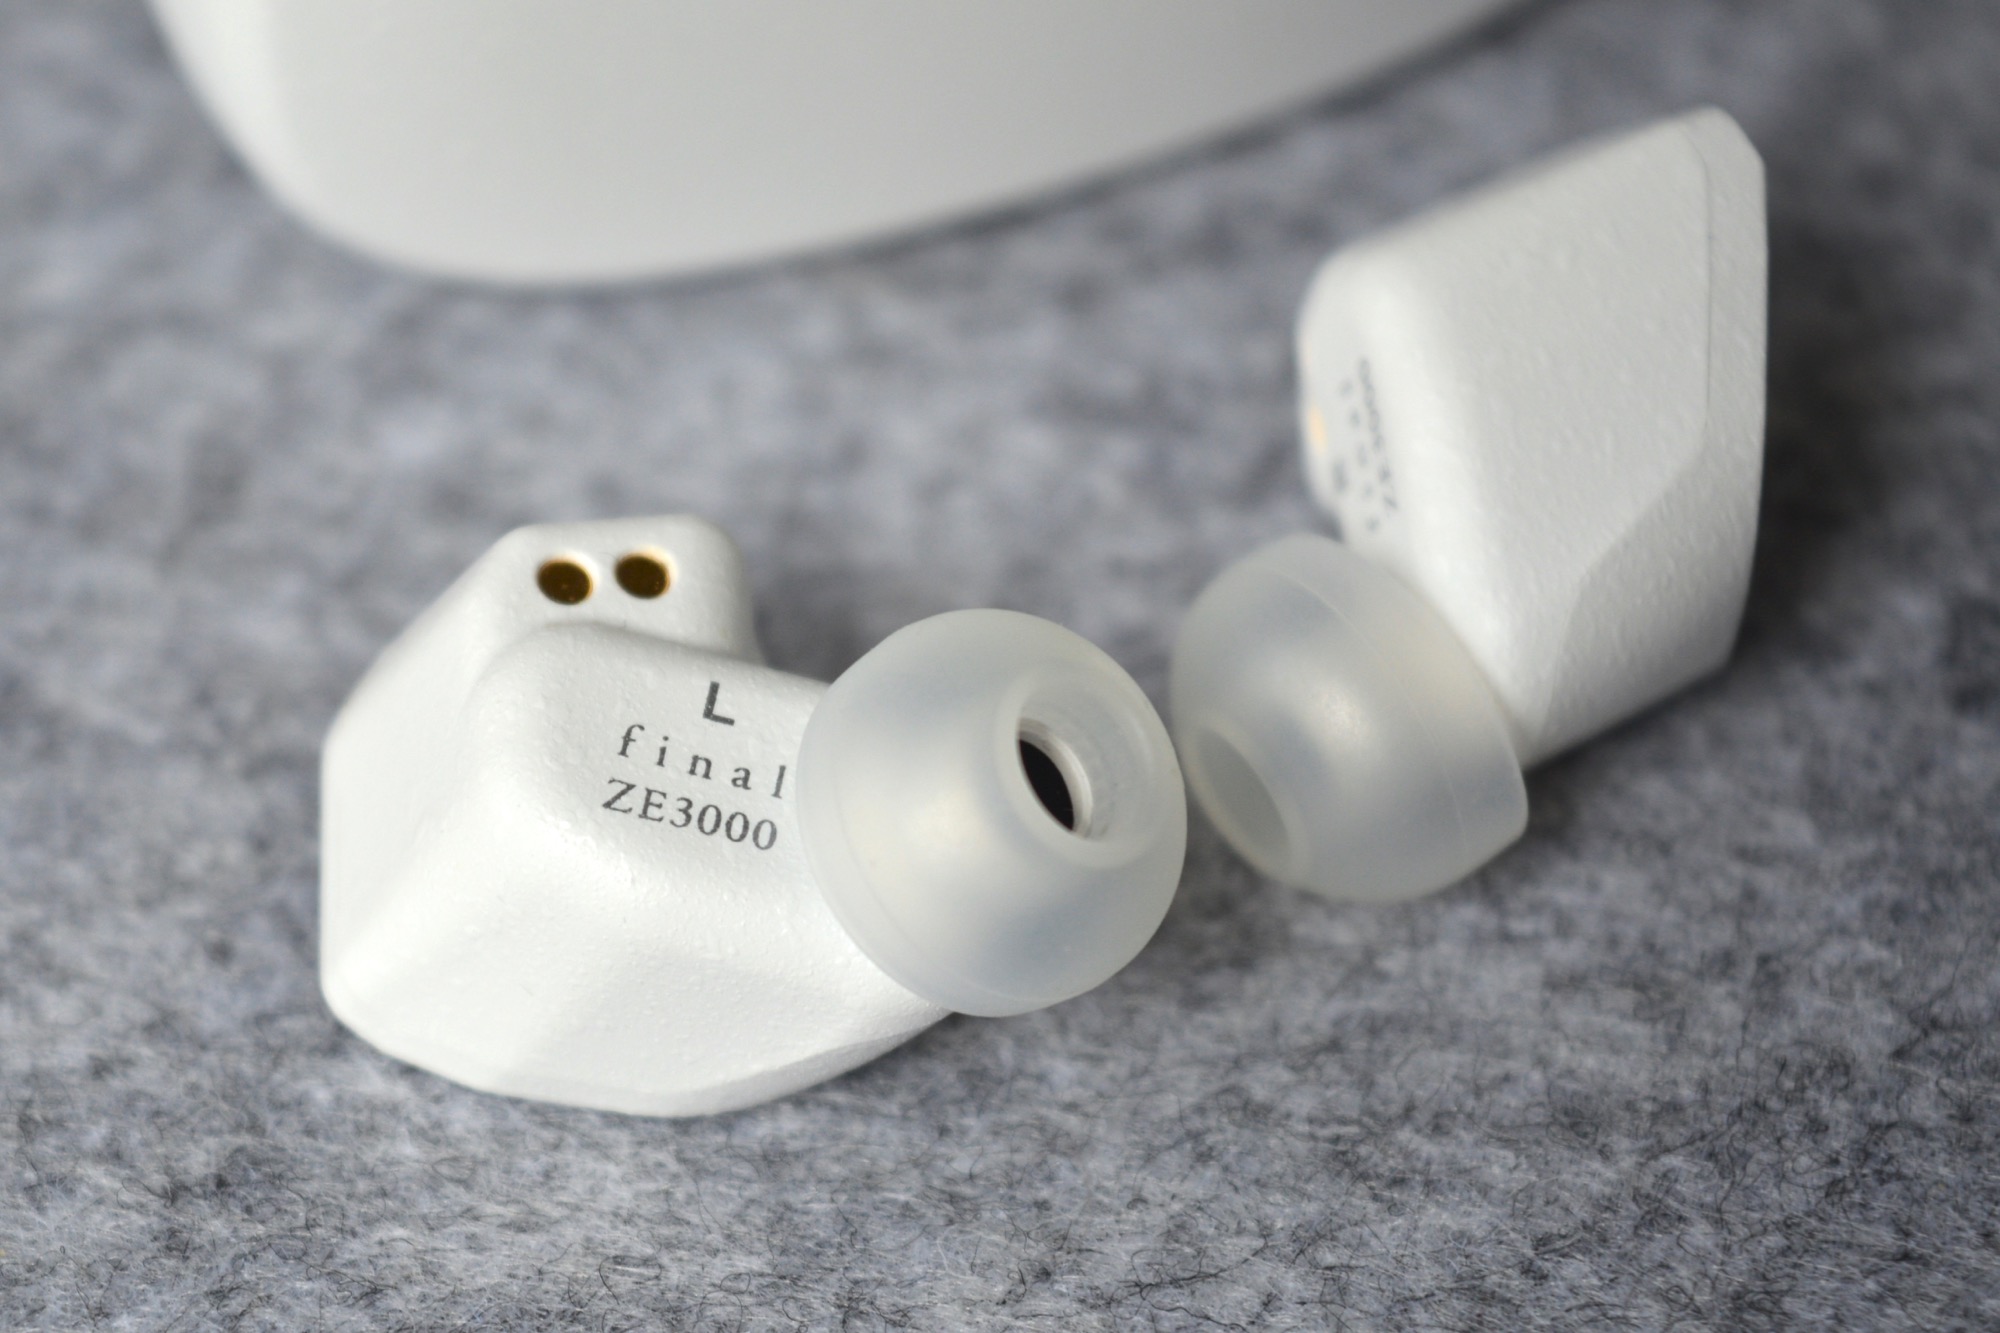 Final Audio ZE3000 review: Doing one thing really well | Digital